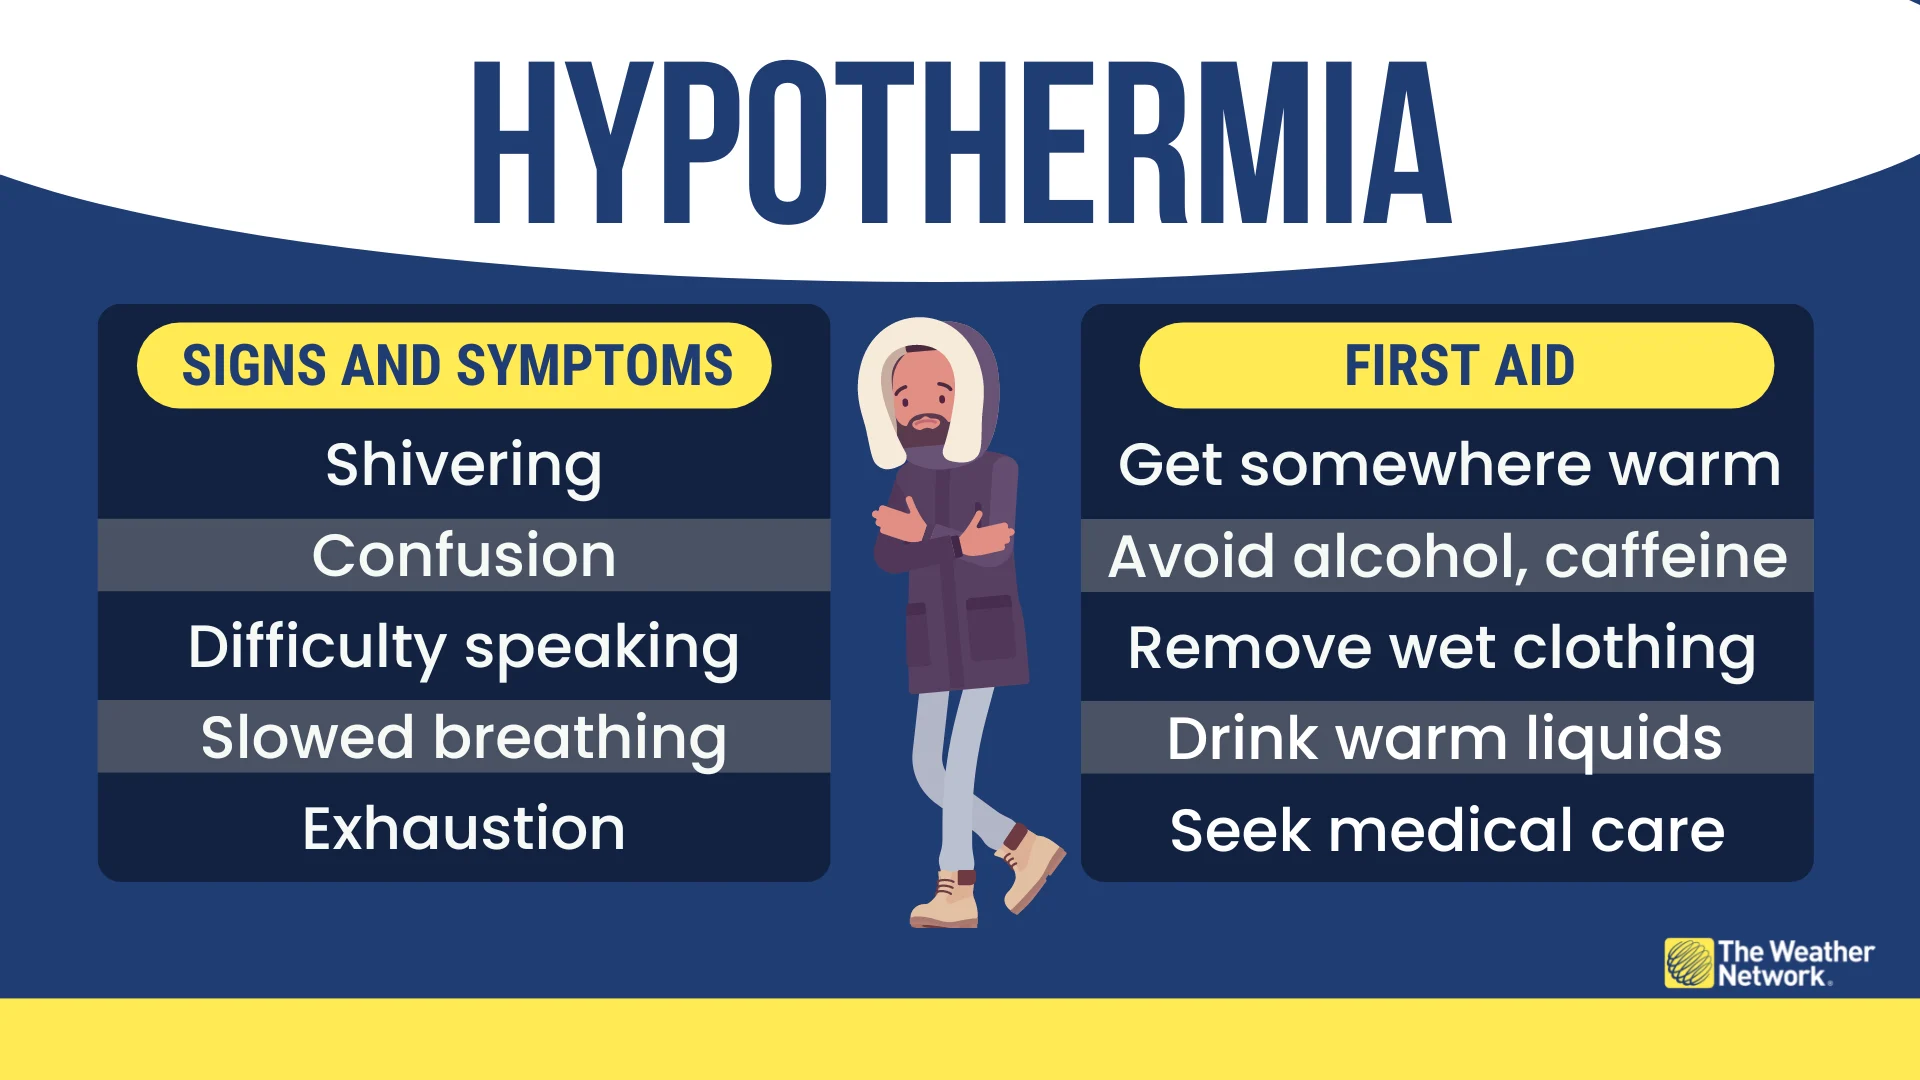 Hyprothermia signs first aid infographic